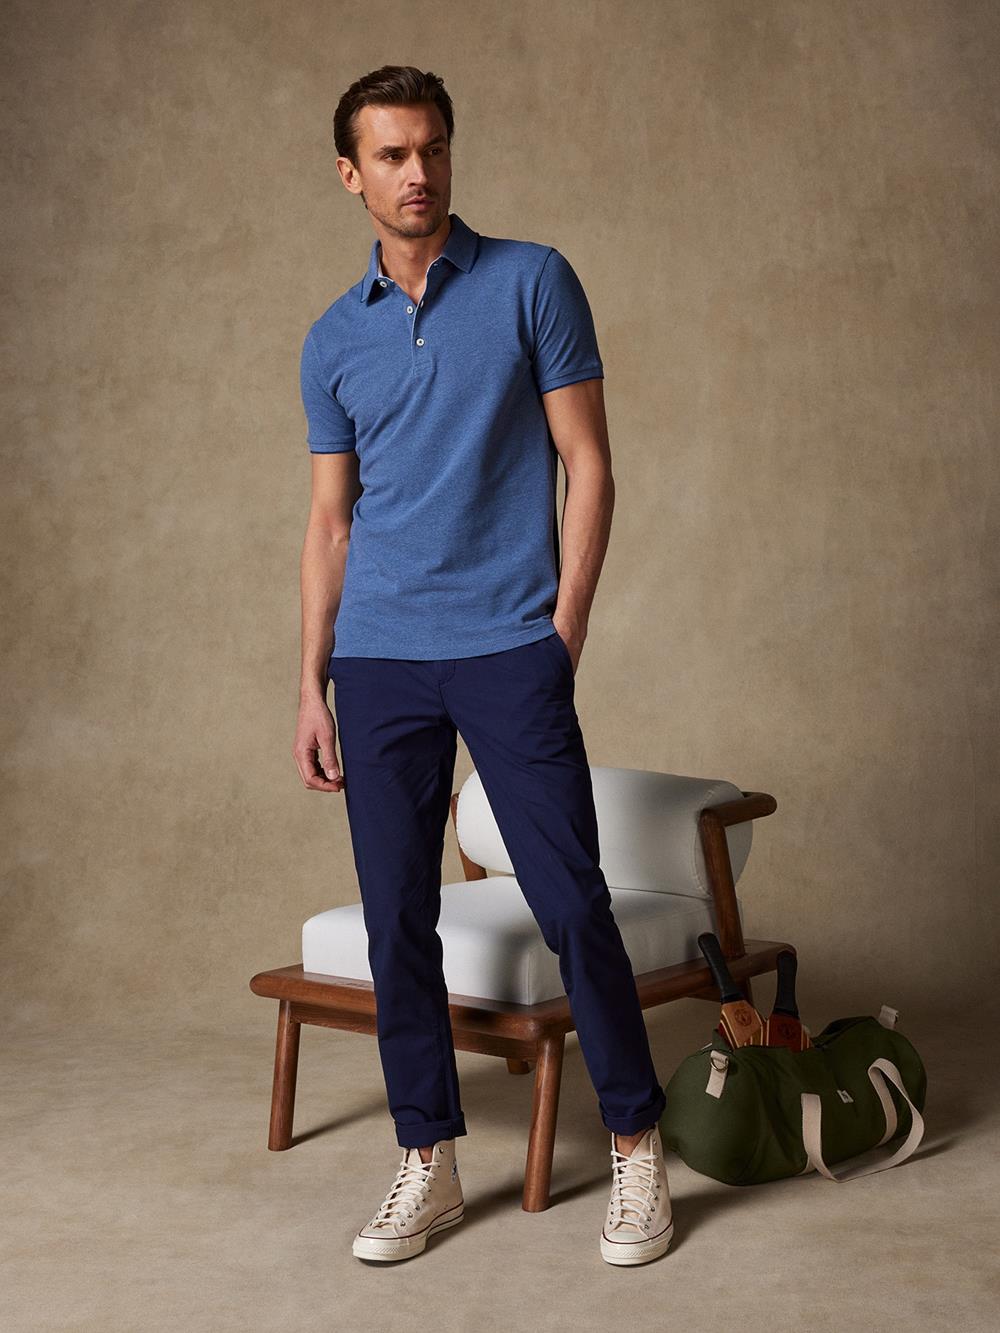 Stani Polo in mottled blue pique